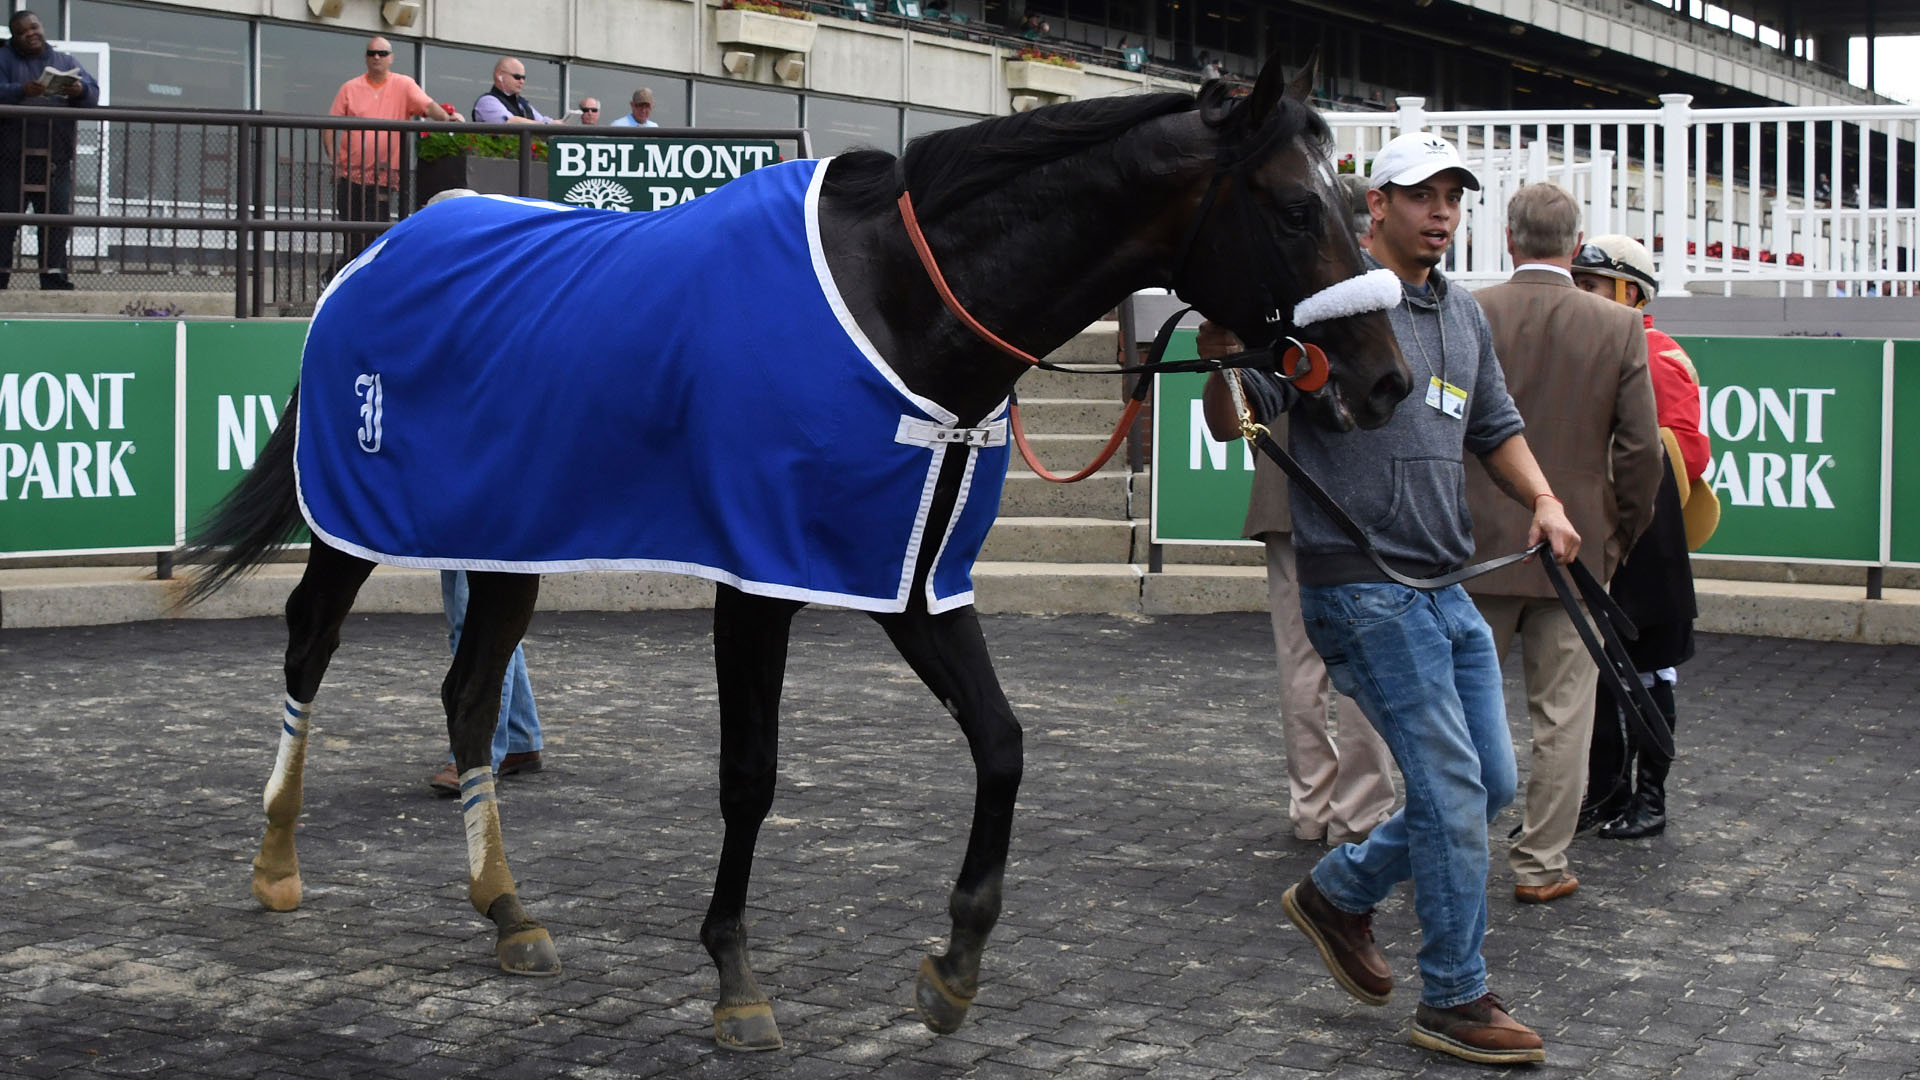 Stakes-placed Candygram (Candy Ride - Church Camp), owned as part of a thoroughbred racing partnership with Centennial Farms. Shown in the winner's circle at Belmont Park.